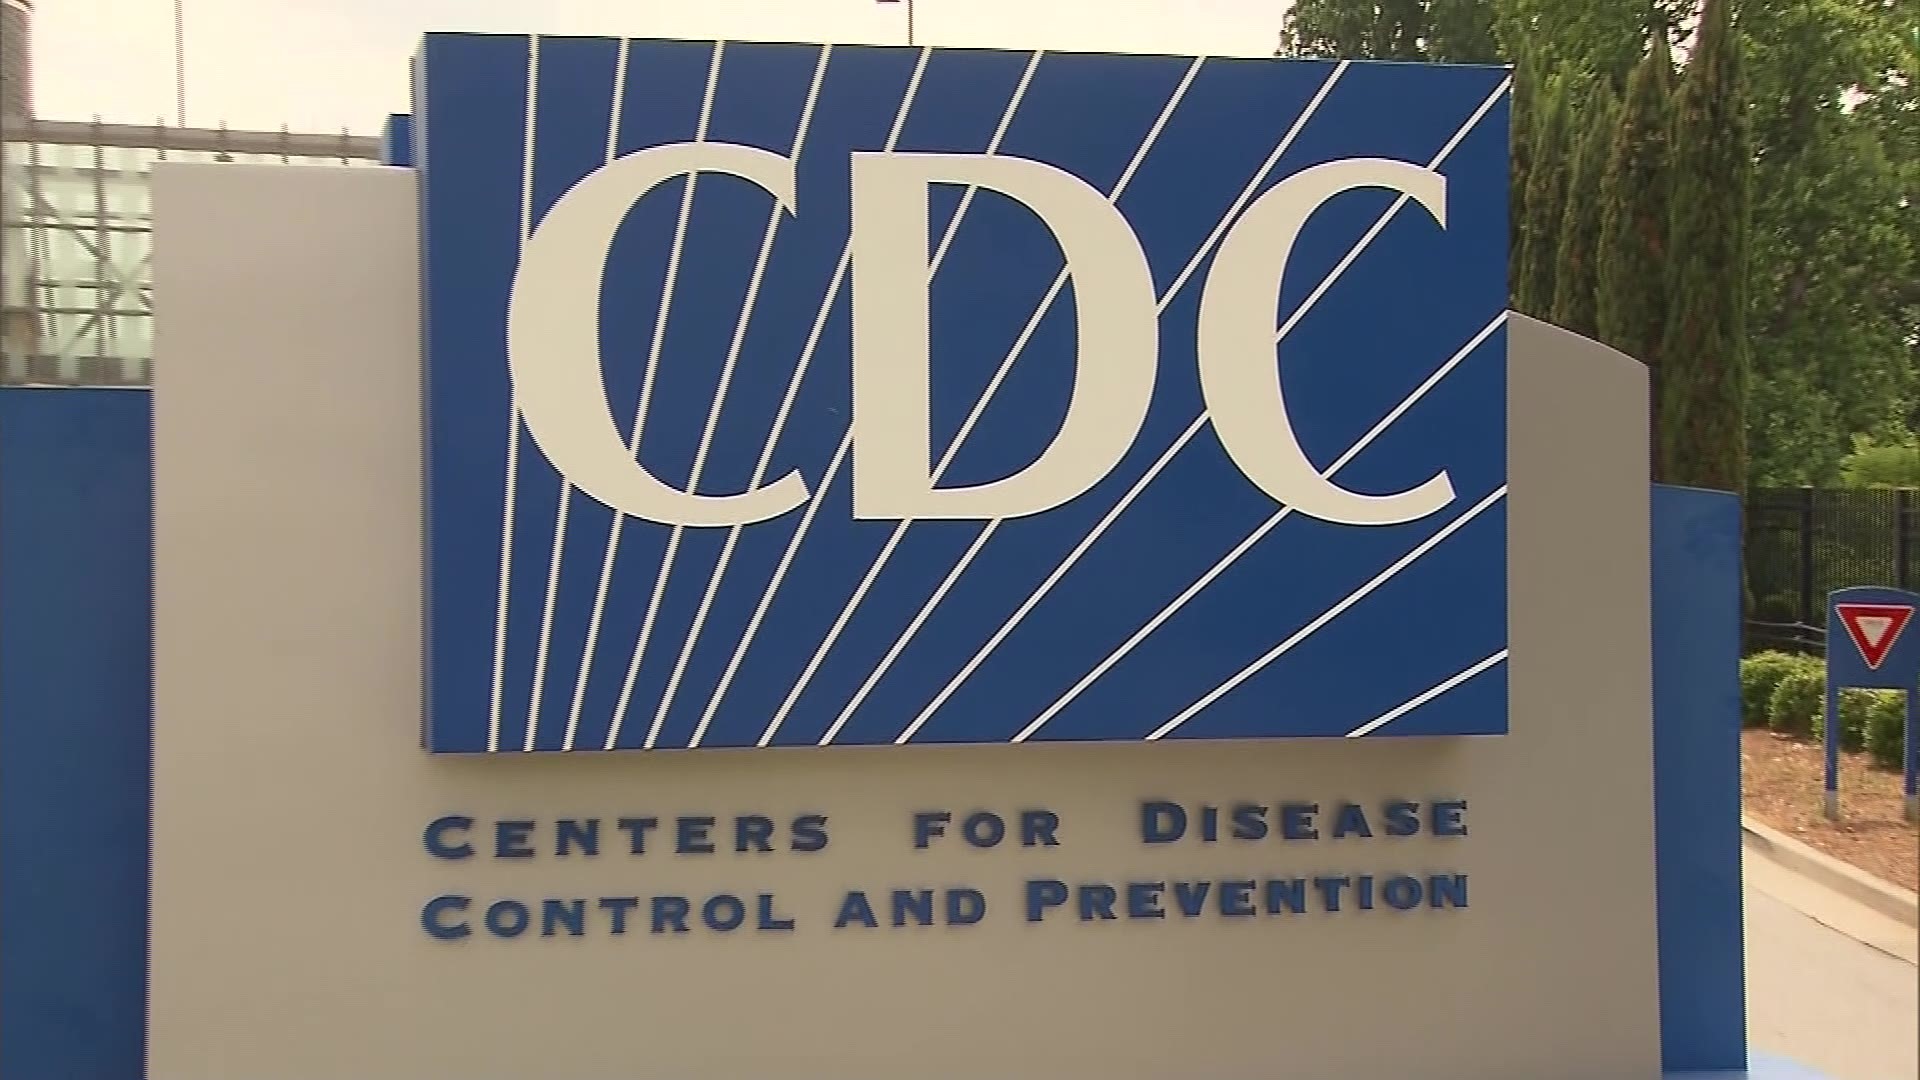 CDC estimates 19 million flu cases and up to 25,000 deaths in the U.S. between October and January